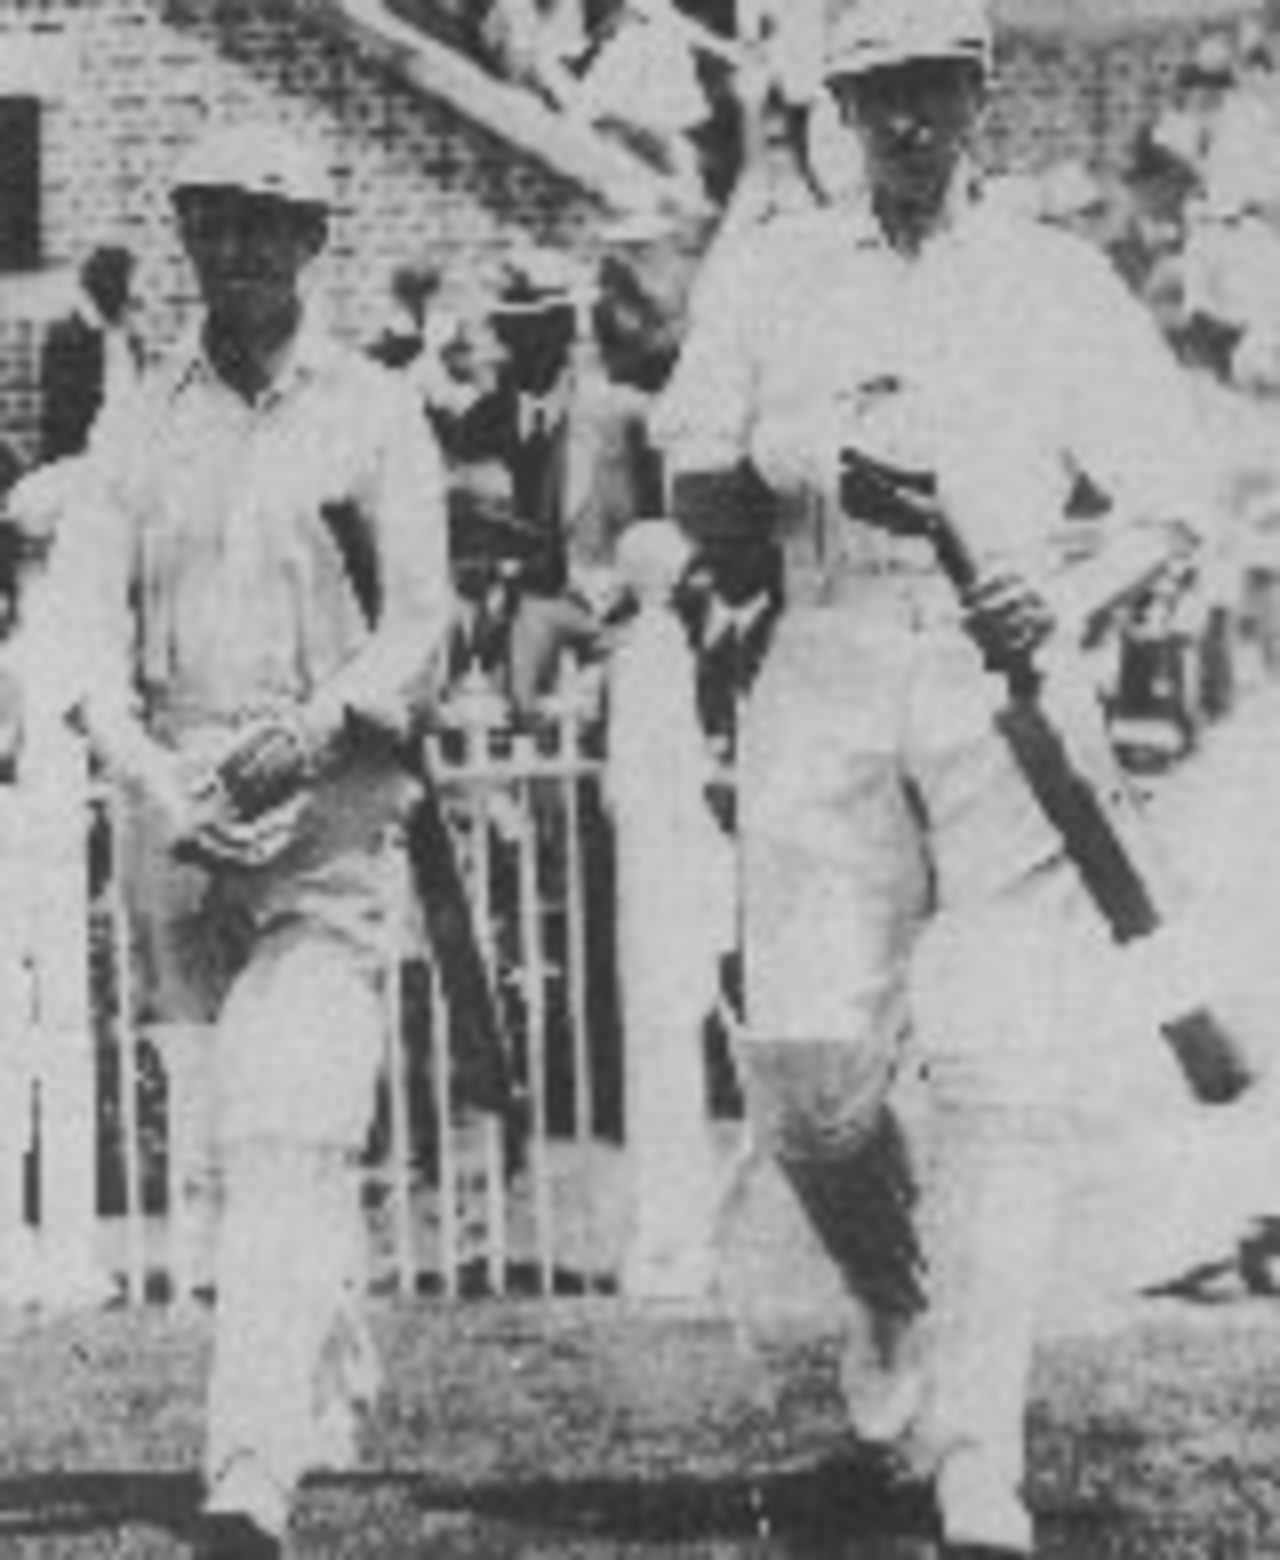 Alan Kippax (left) and Hal Hooker resume their partnership at the MCG, December 1928.  They added a record 307 for the last New South Wales wicket